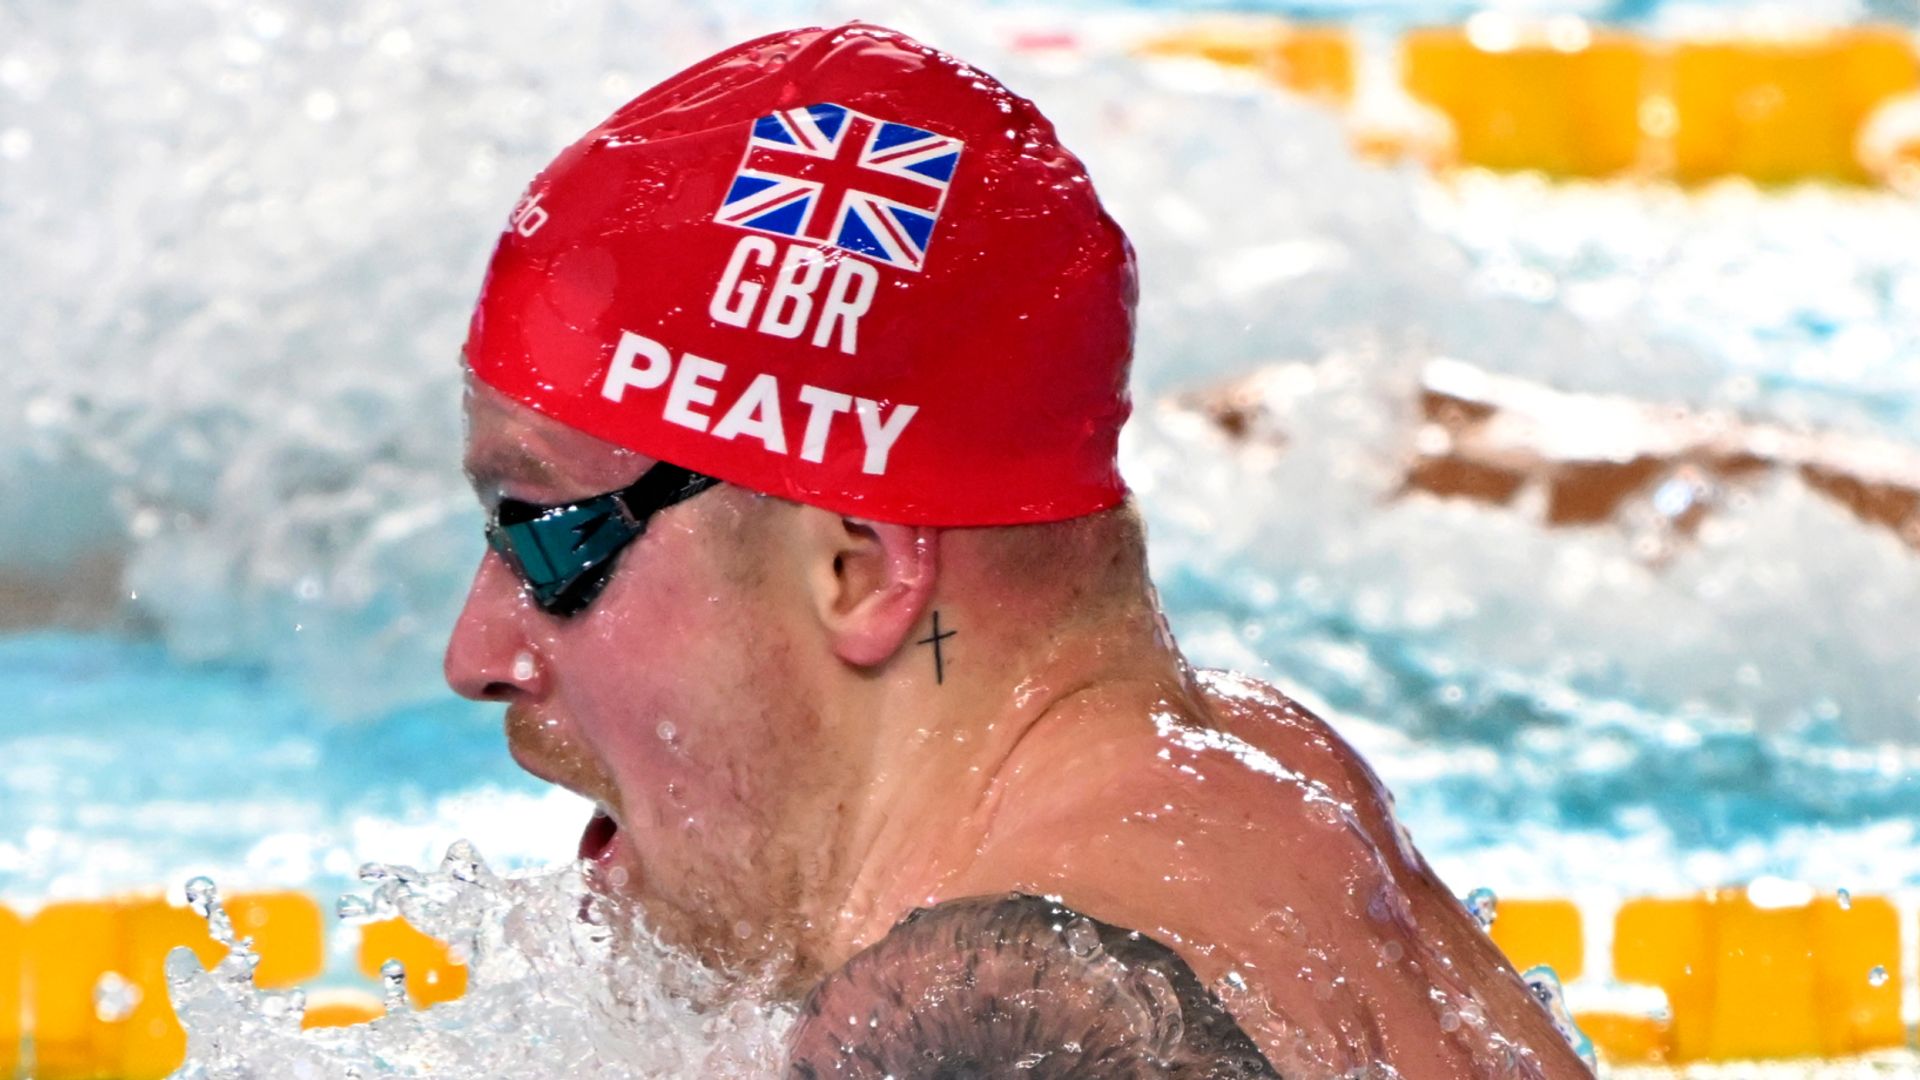 Peaty: Winning gold medals does not fix problems